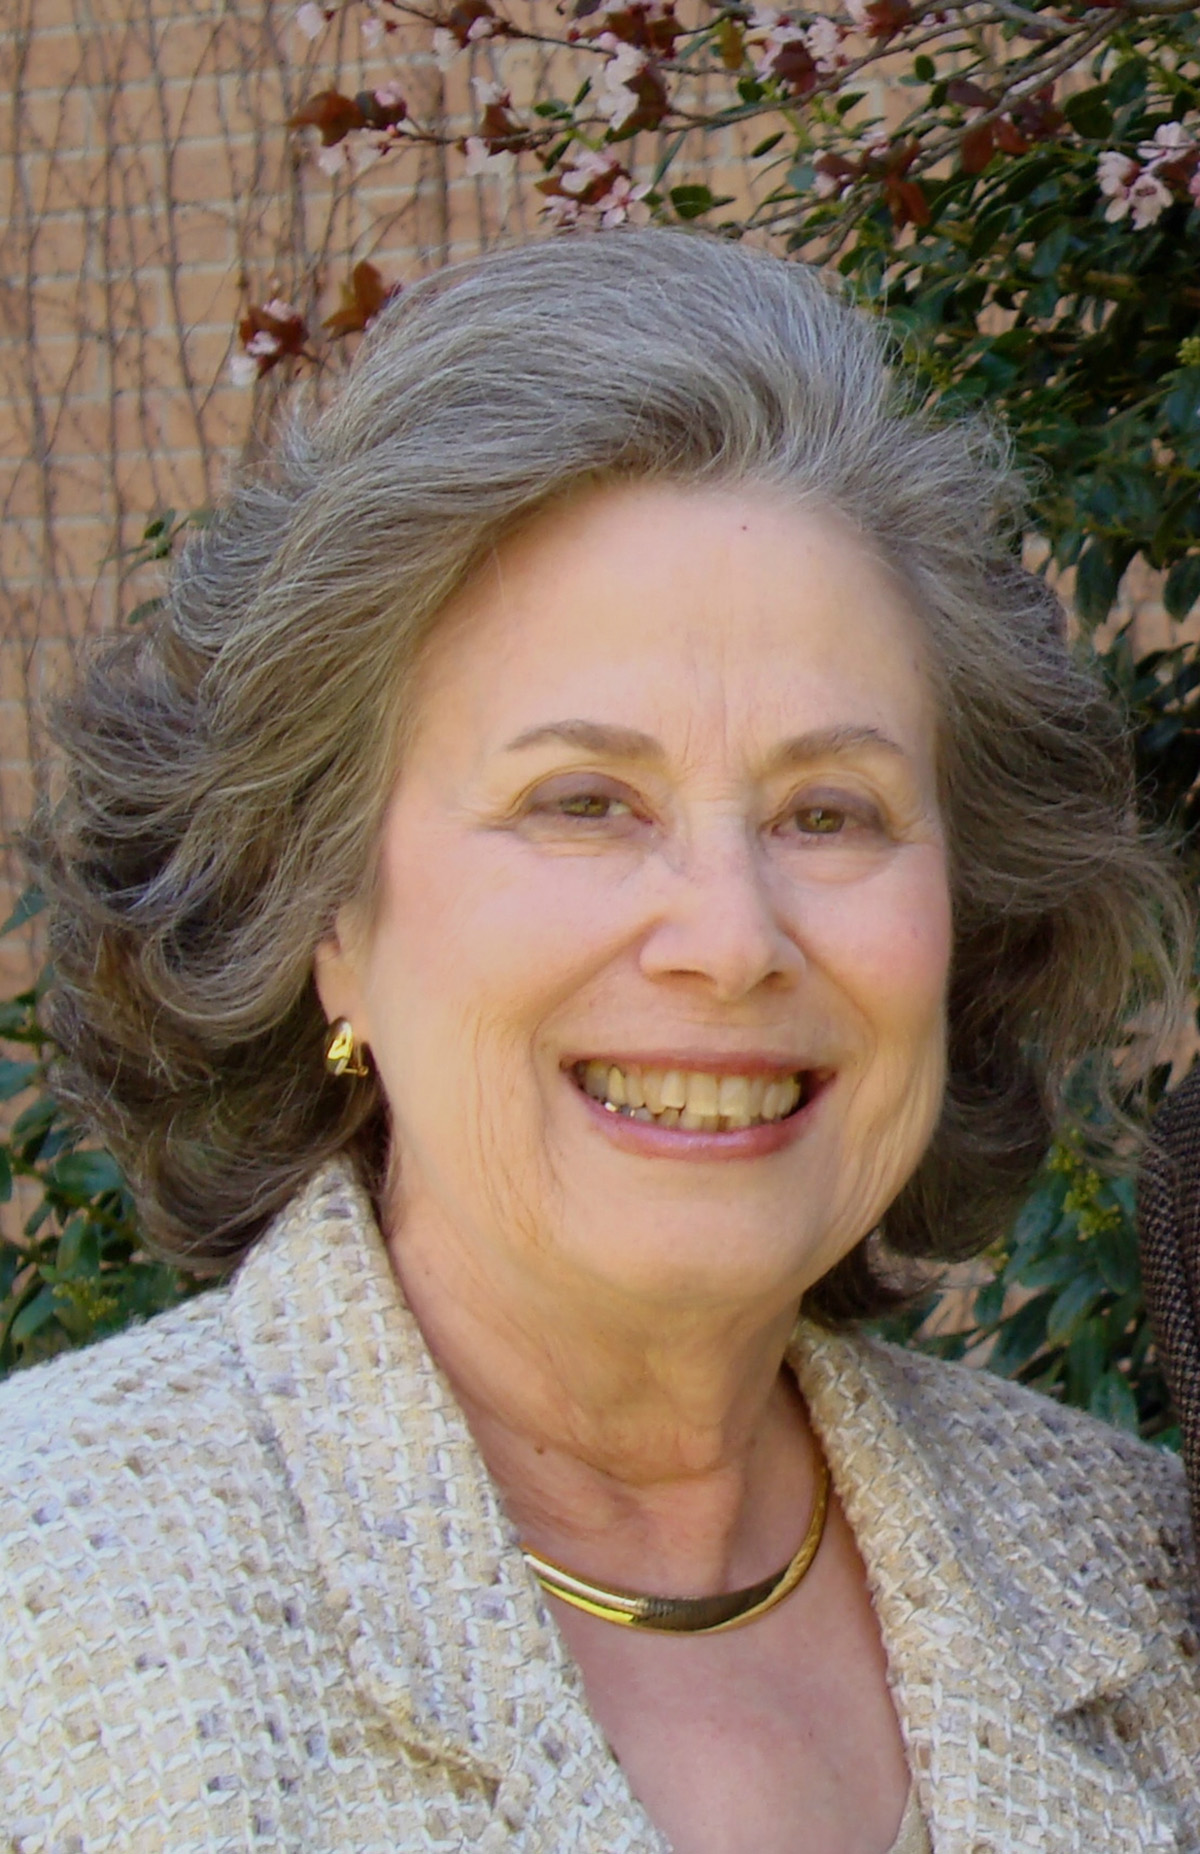 Ana Cleveland, Regents Professor at the University of North Texas, is the recipient of the 2018 Marcia C. Noyes Award, the highest honor that the Medical Library Association confers.